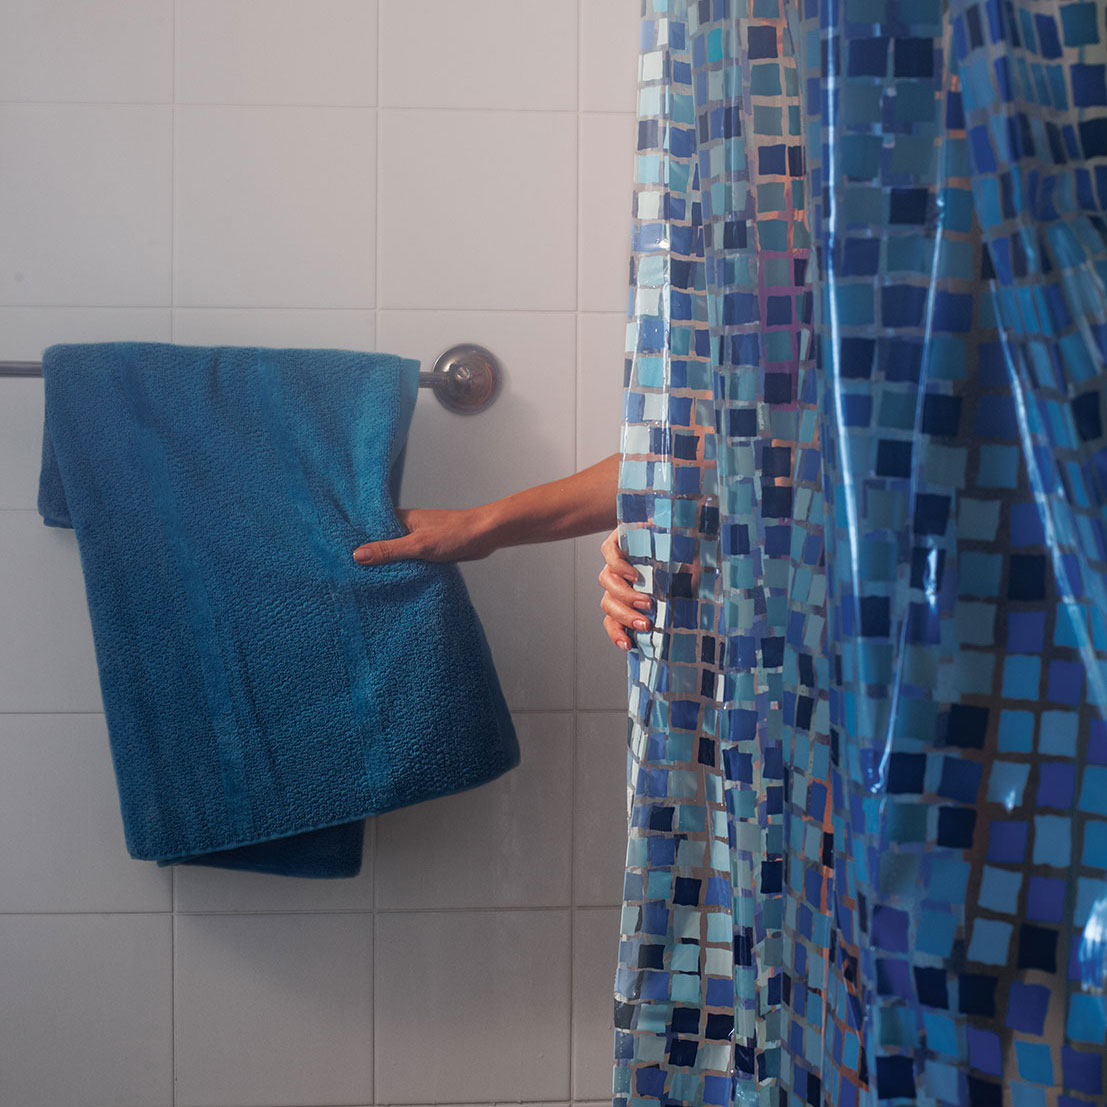 Person in shower reaching for a towel